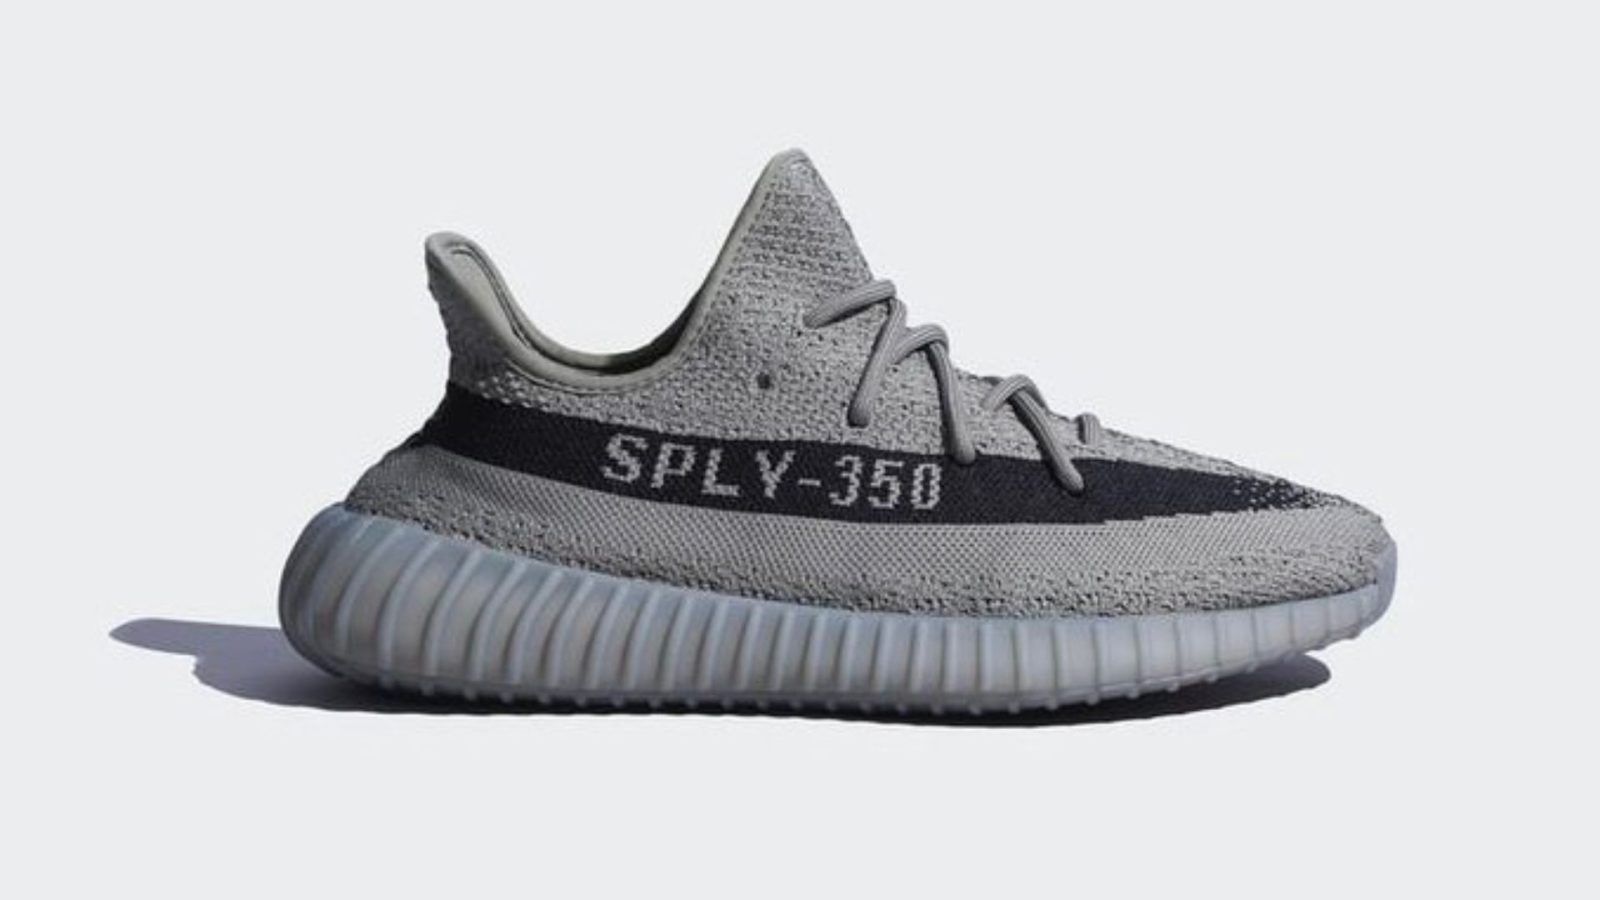 Adidas is releasing unbranded YEEZY 350 V2